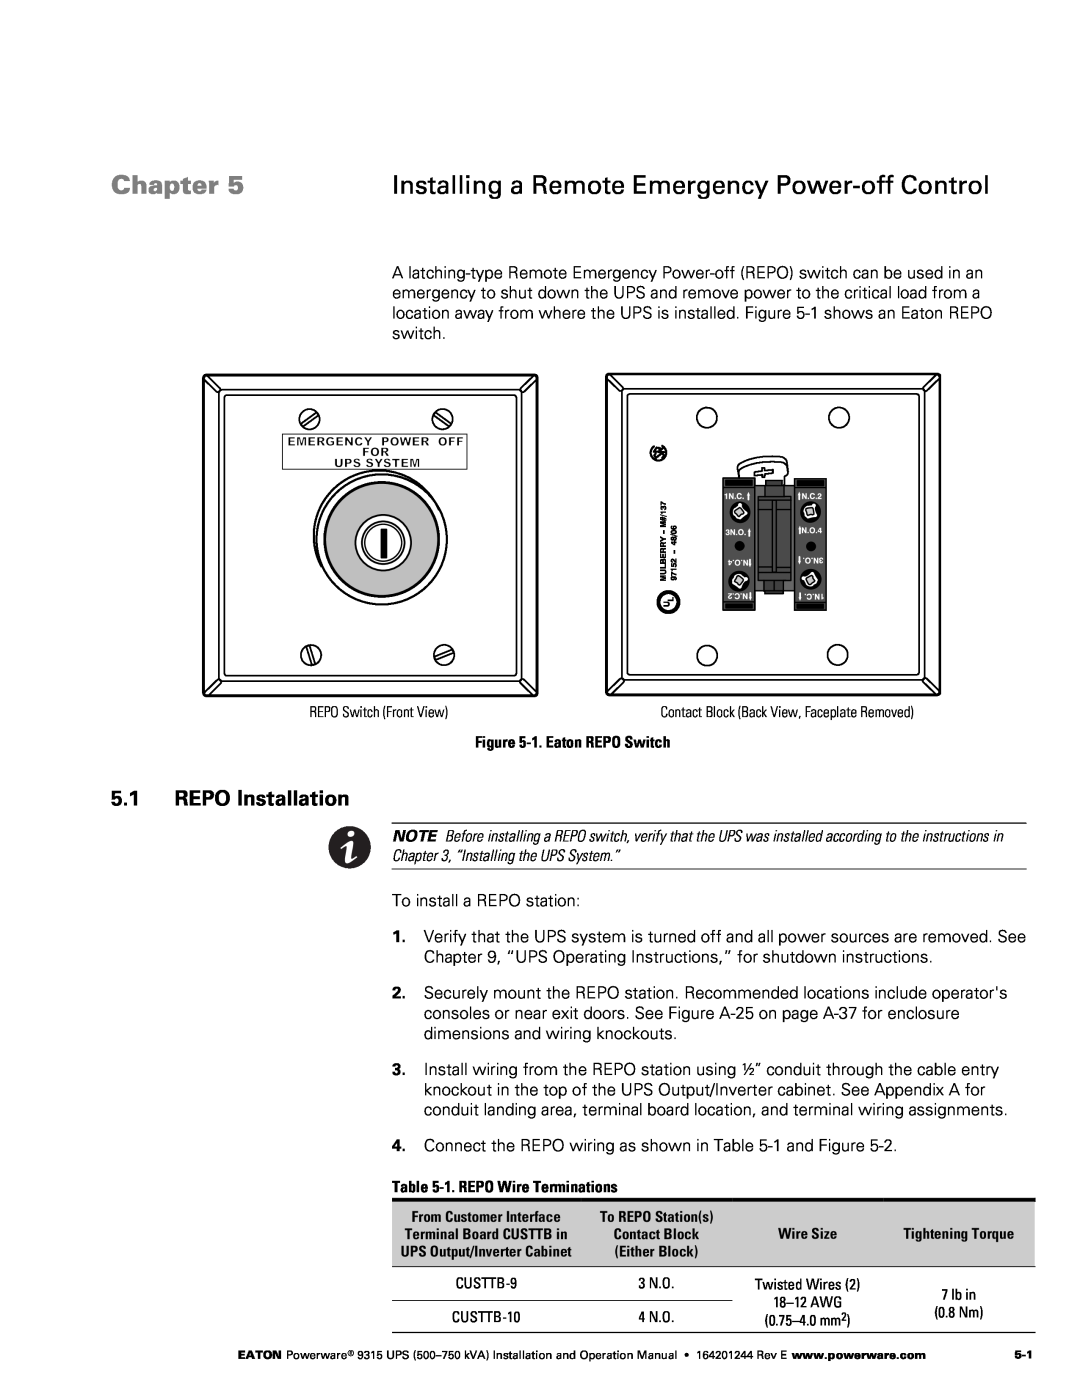 Powerware Powerware 9315 operation manual REPO Installation, Chapter, Installing a Remote Emergency Power-off Control 